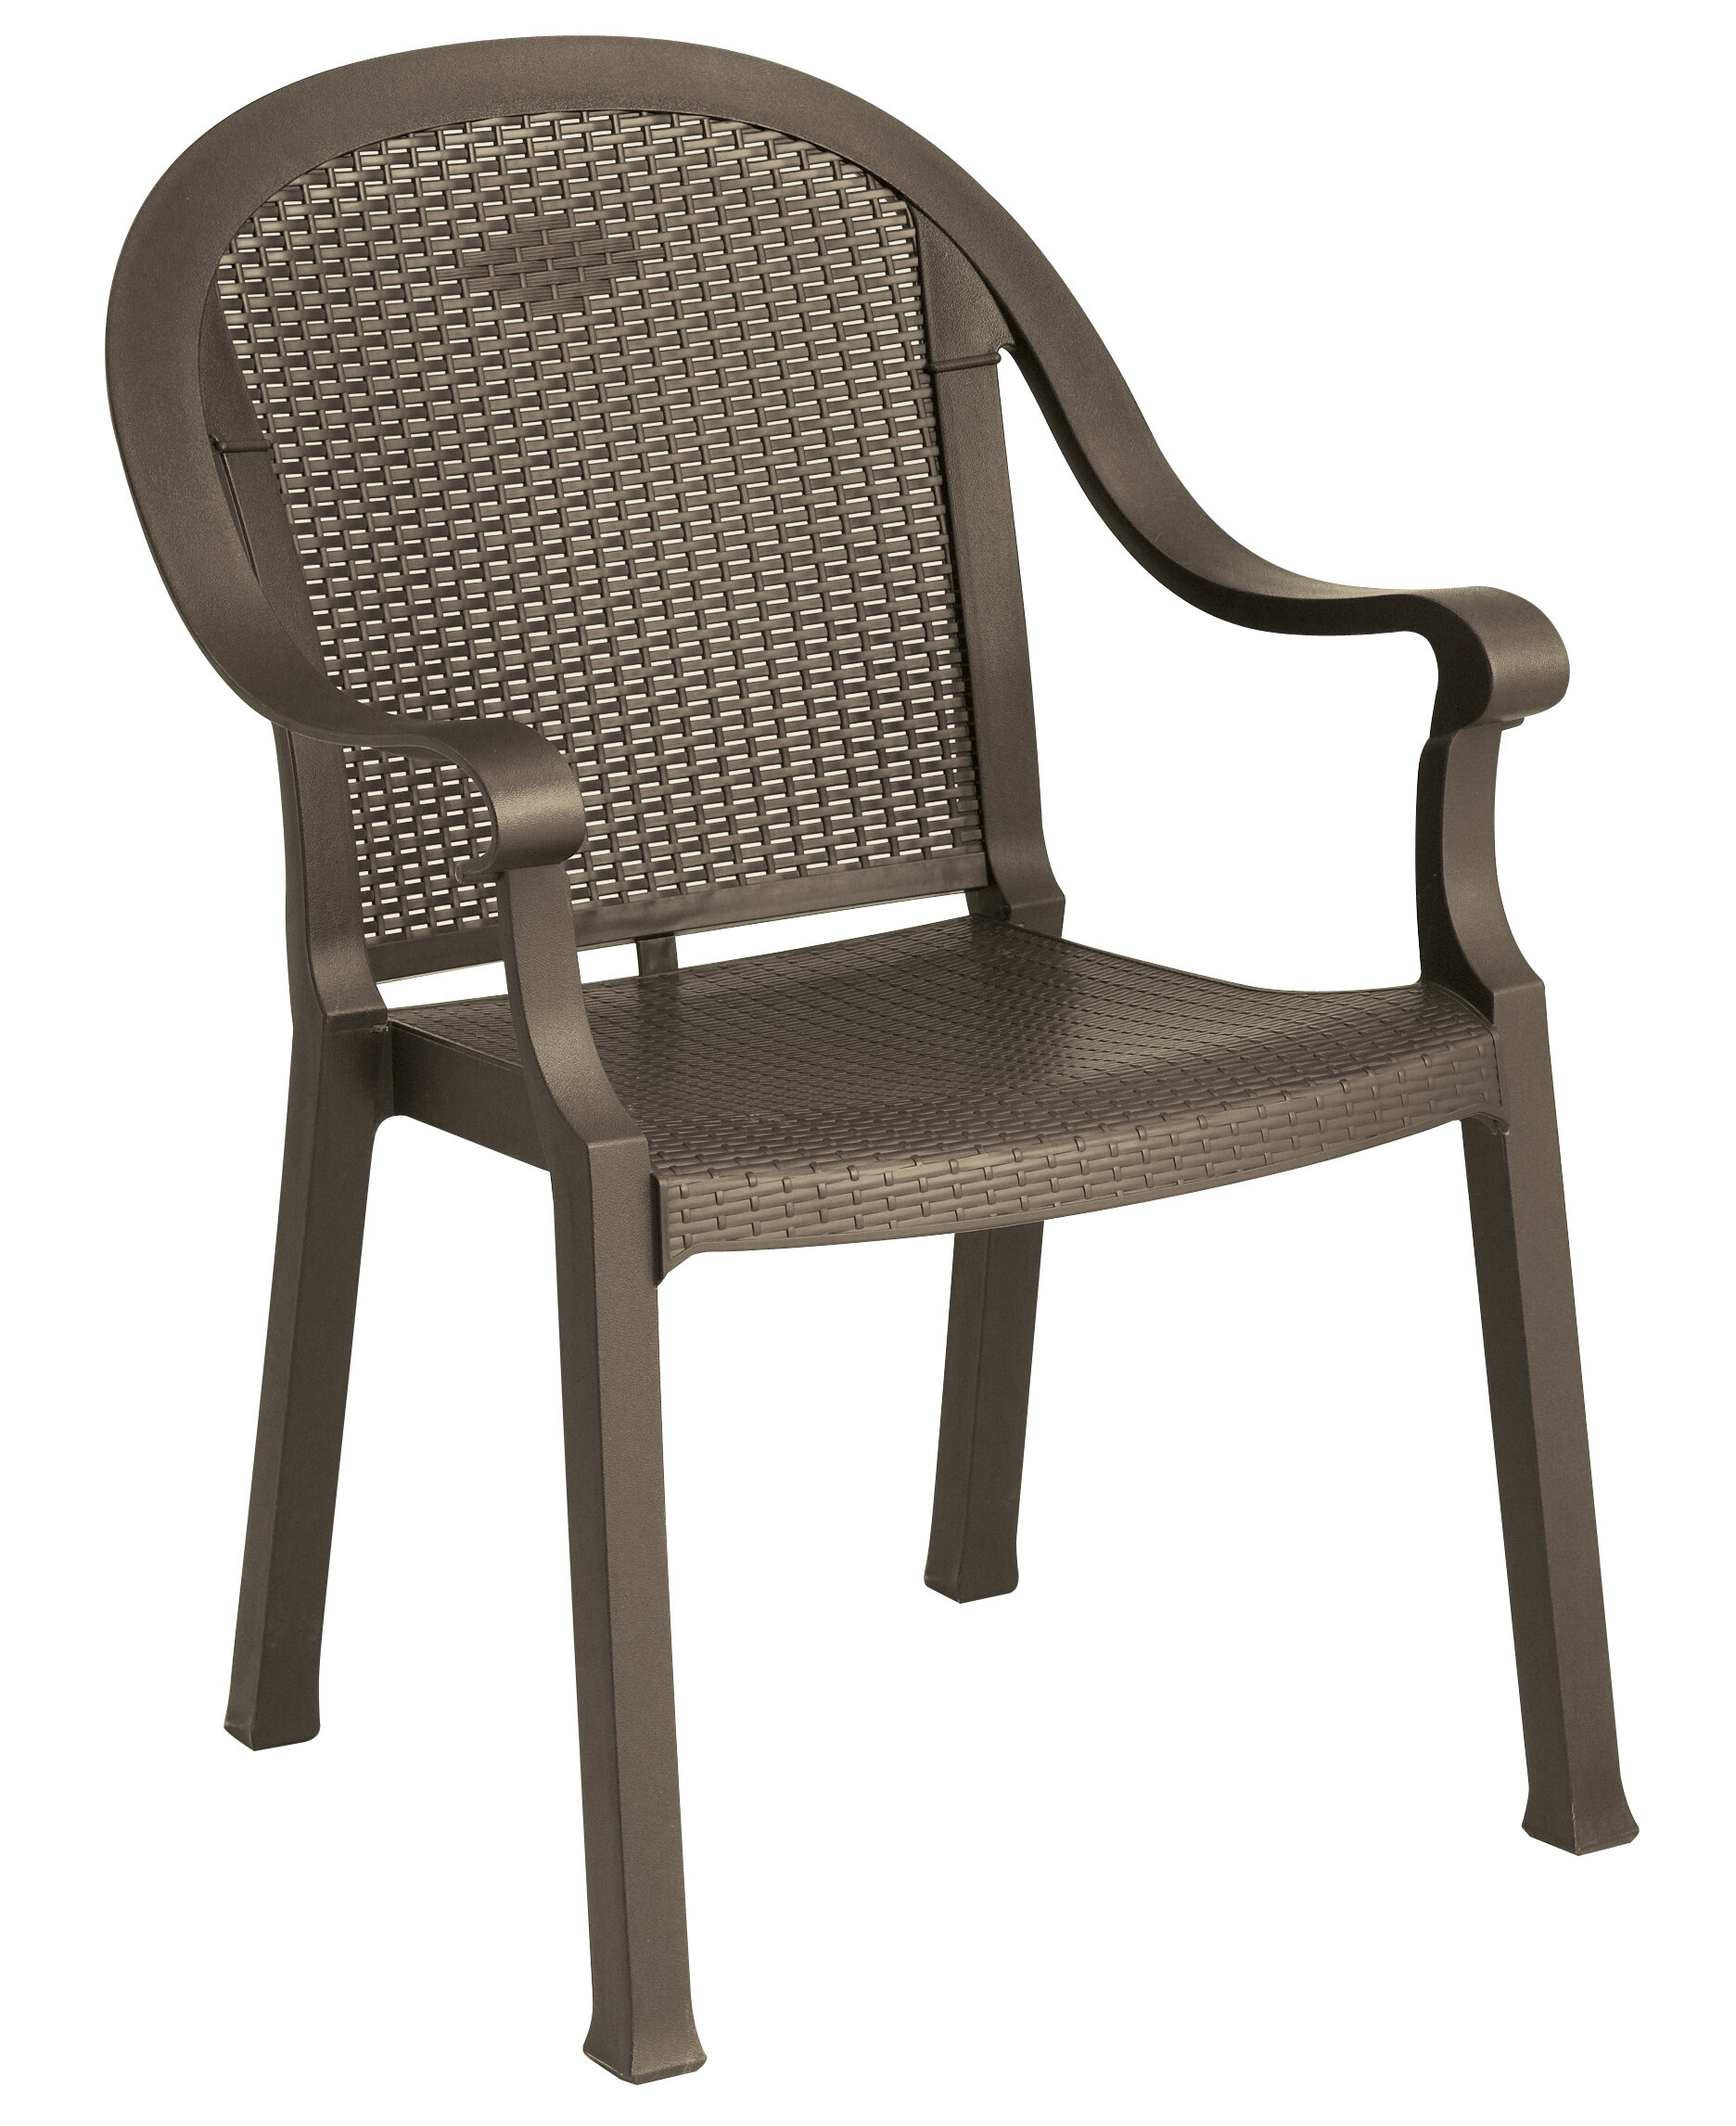 Grosfillex US720037 Sumatra Outdoor Armchair - Resin Stack Chair